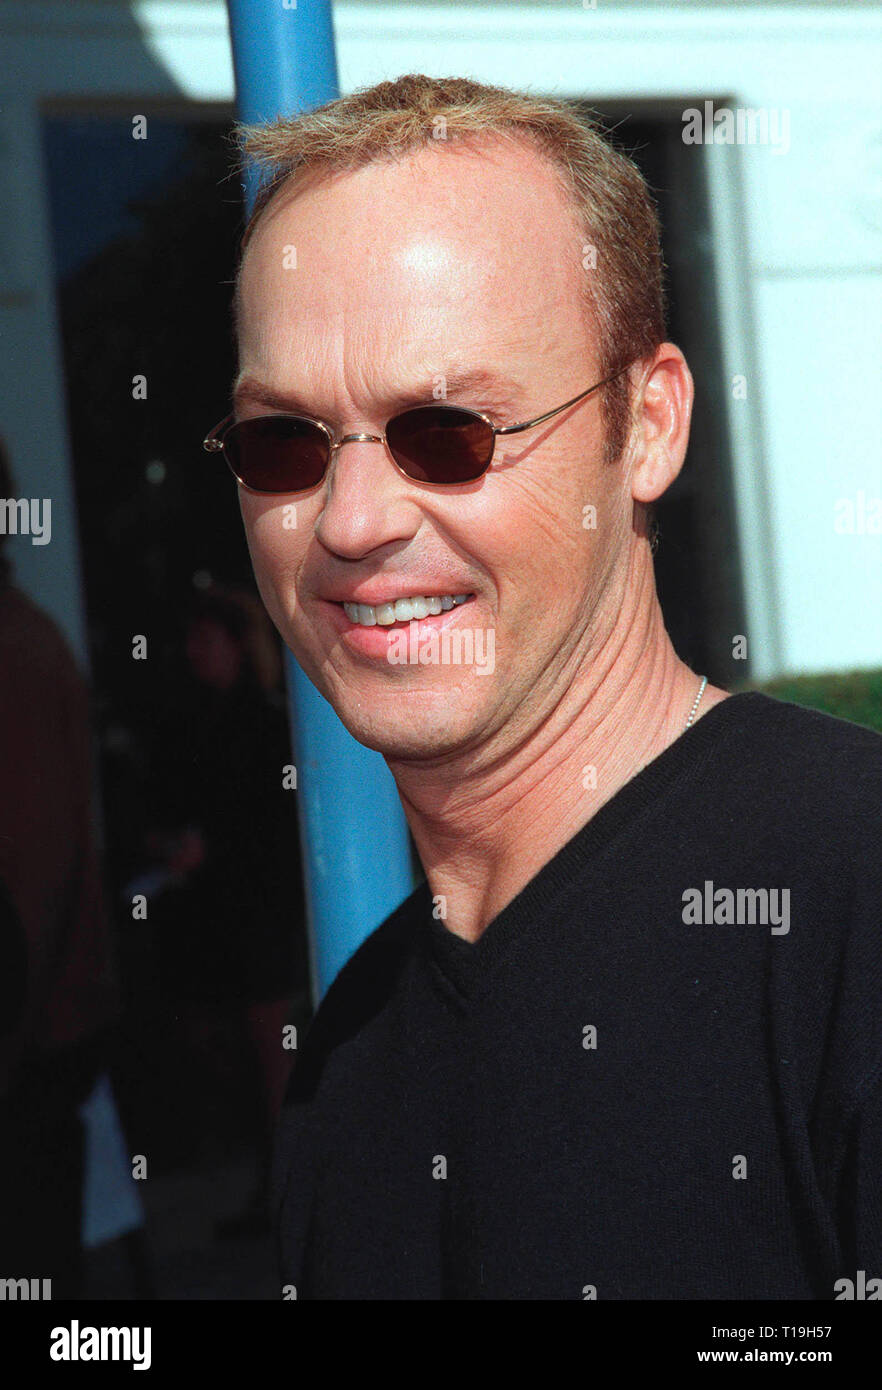 LOS ANGELES, CA - December 5, 1998: Actor MICHAEL KEATON at the premiere in Los Angeles of his new movie 'Jack Frost' in which he stars with Kelly Preston. Stock Photo